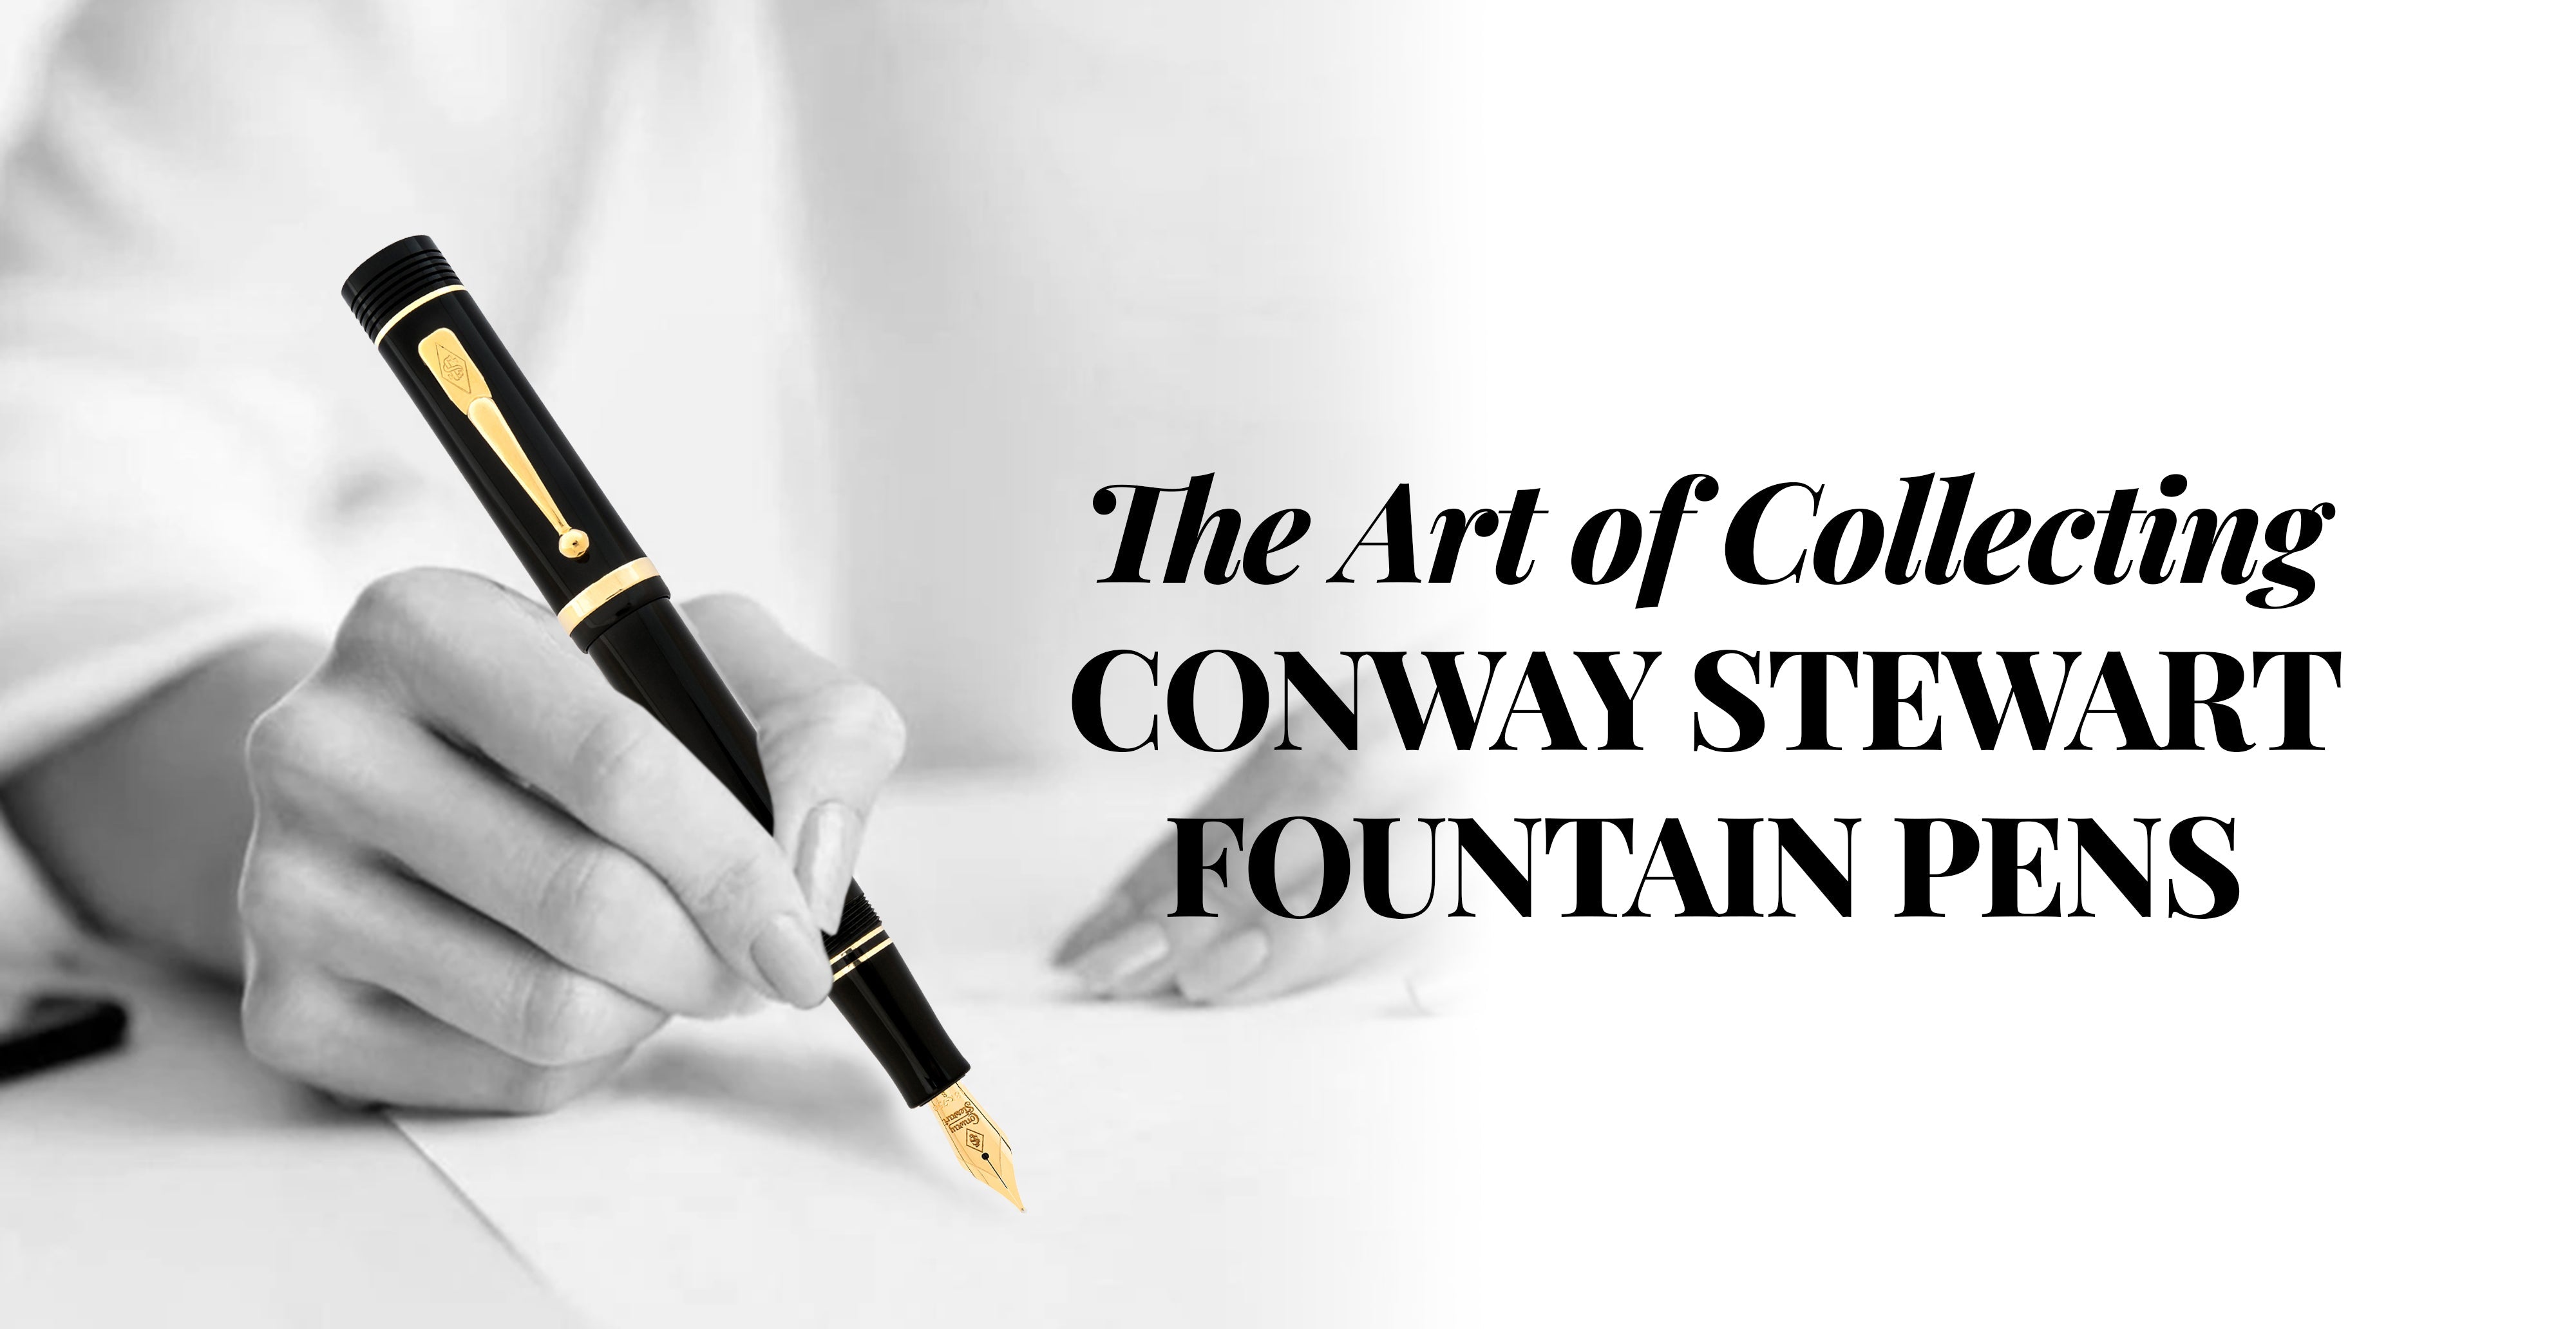 The Art of Collecting Conway Stewart Fountain Pens